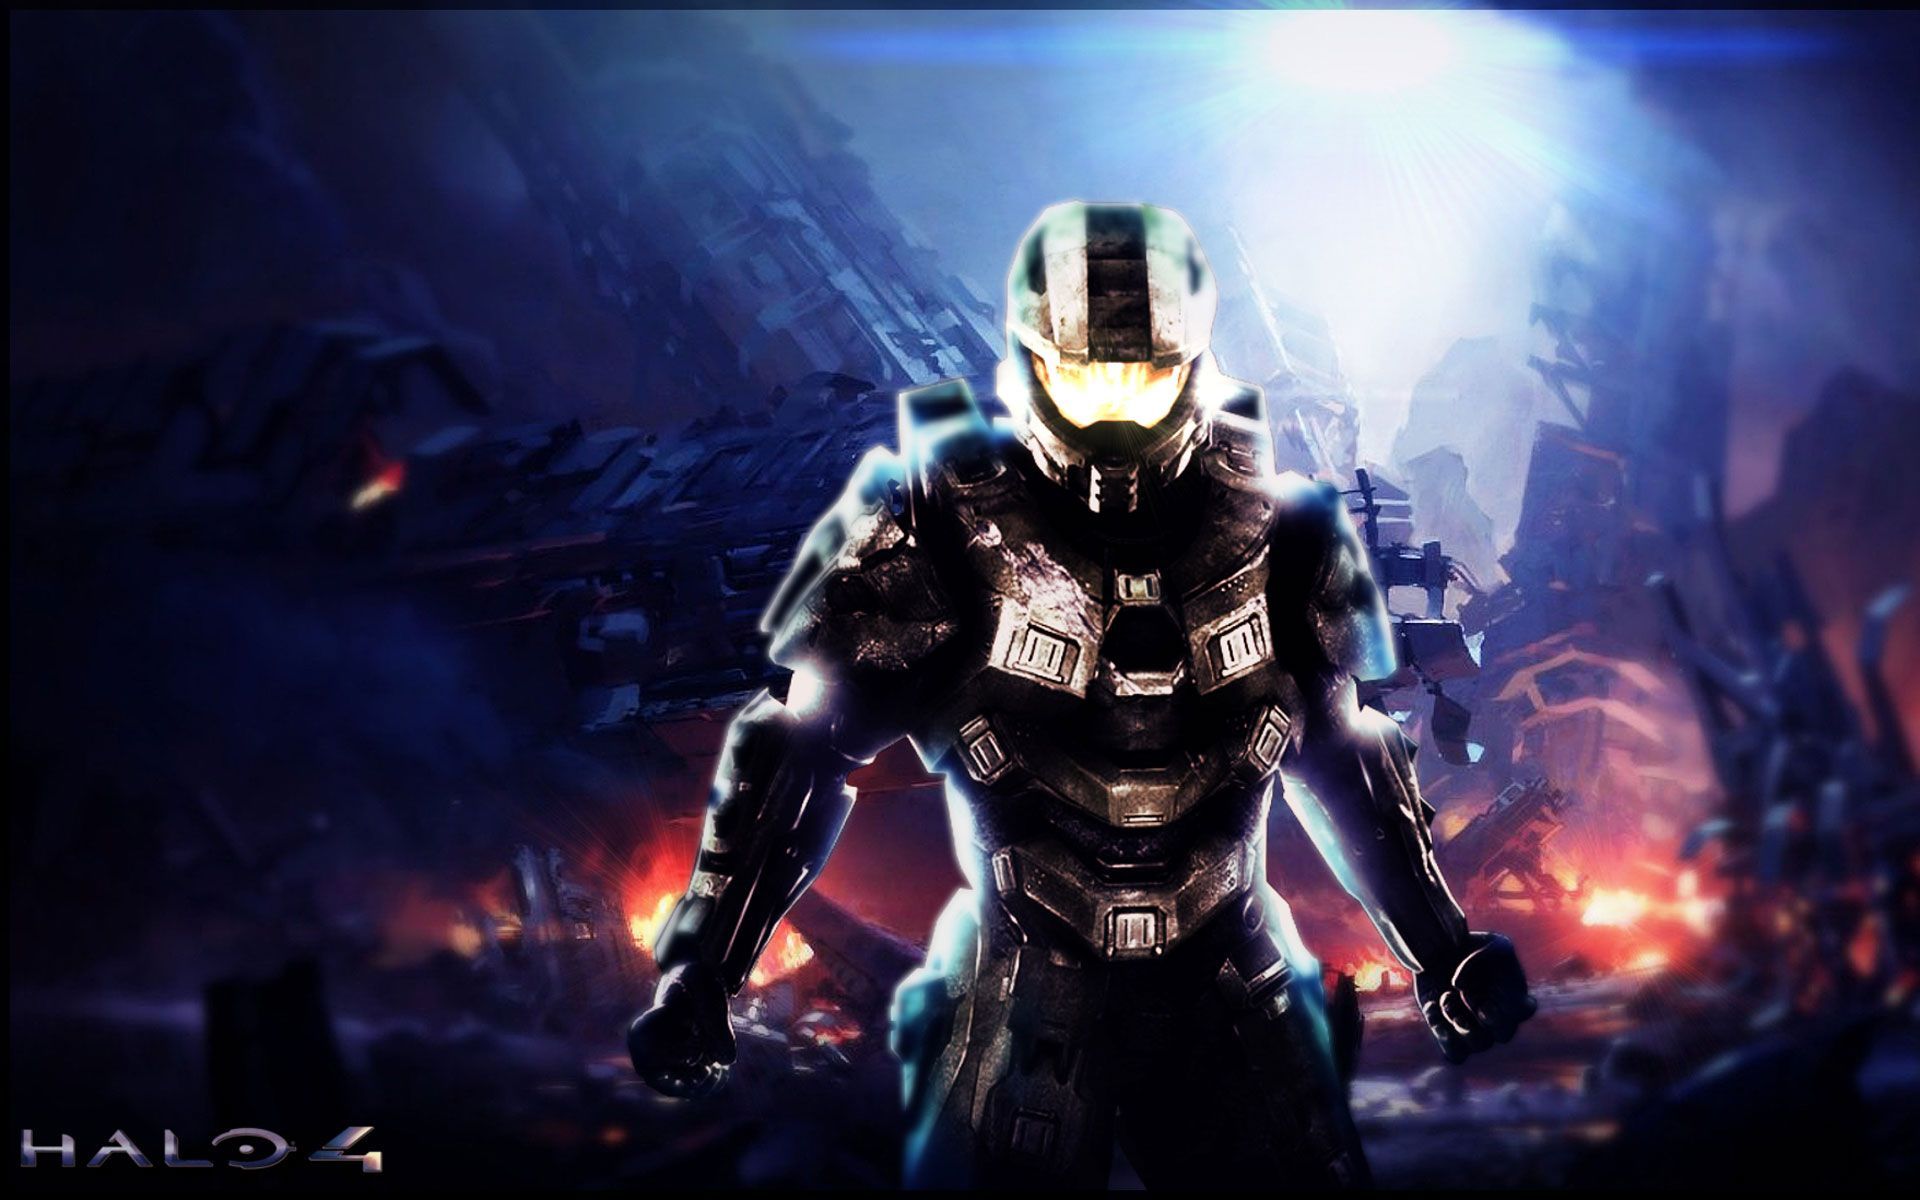 Halo 4 Wallpapers - SD + HD - Gaming Now!